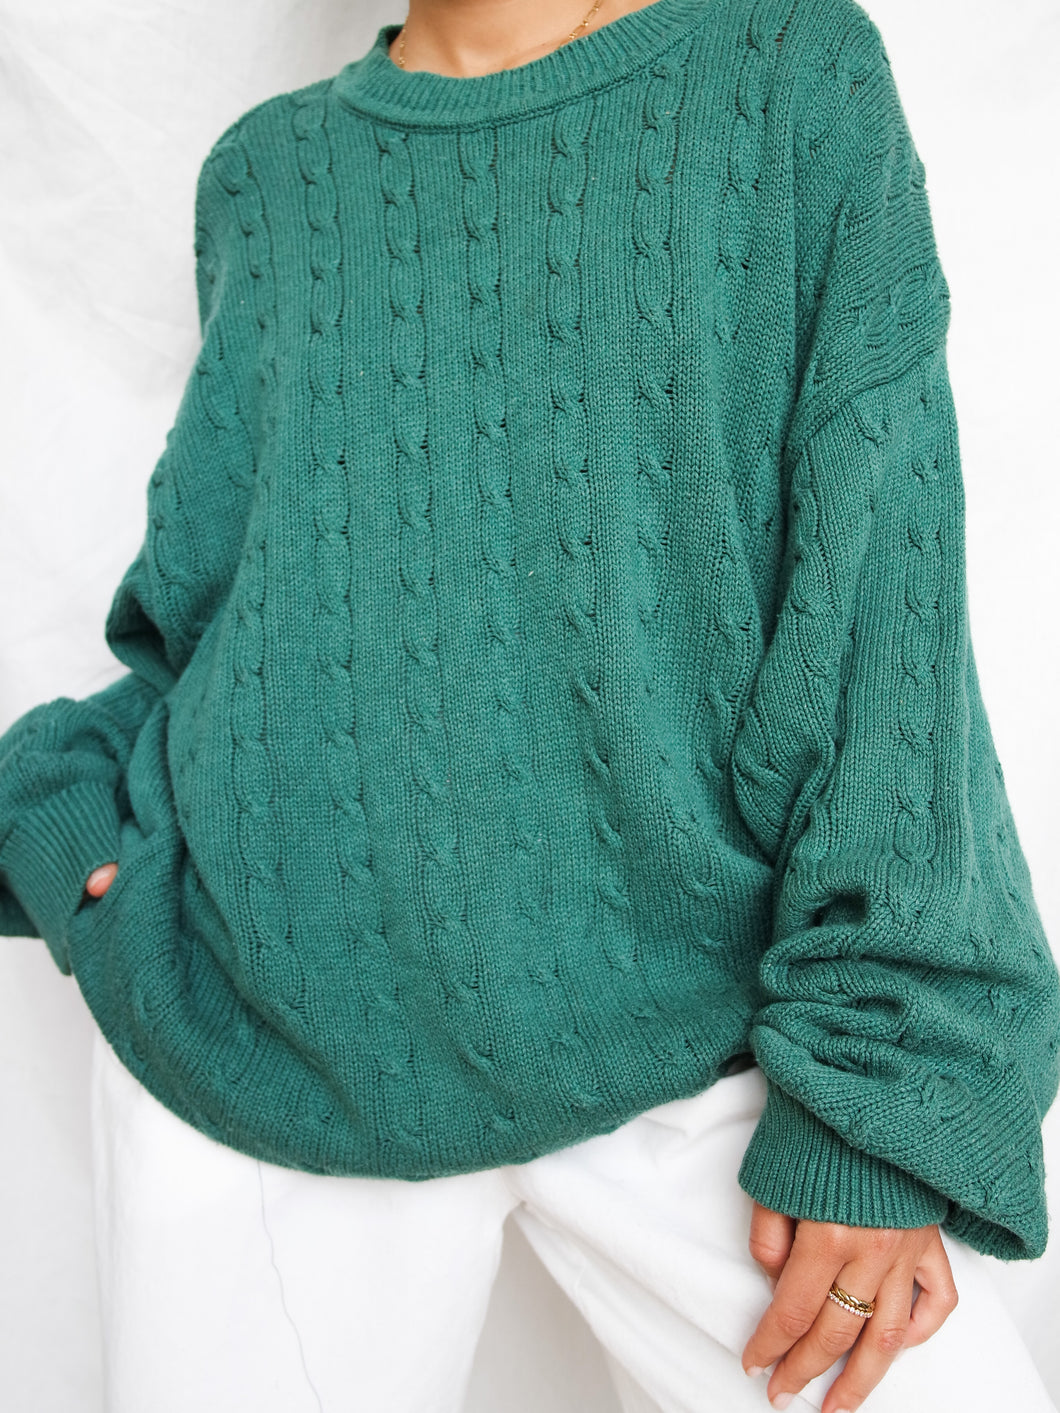 UNITED COLORS OF BENETTON knitted jumper (XL) - lallasshop